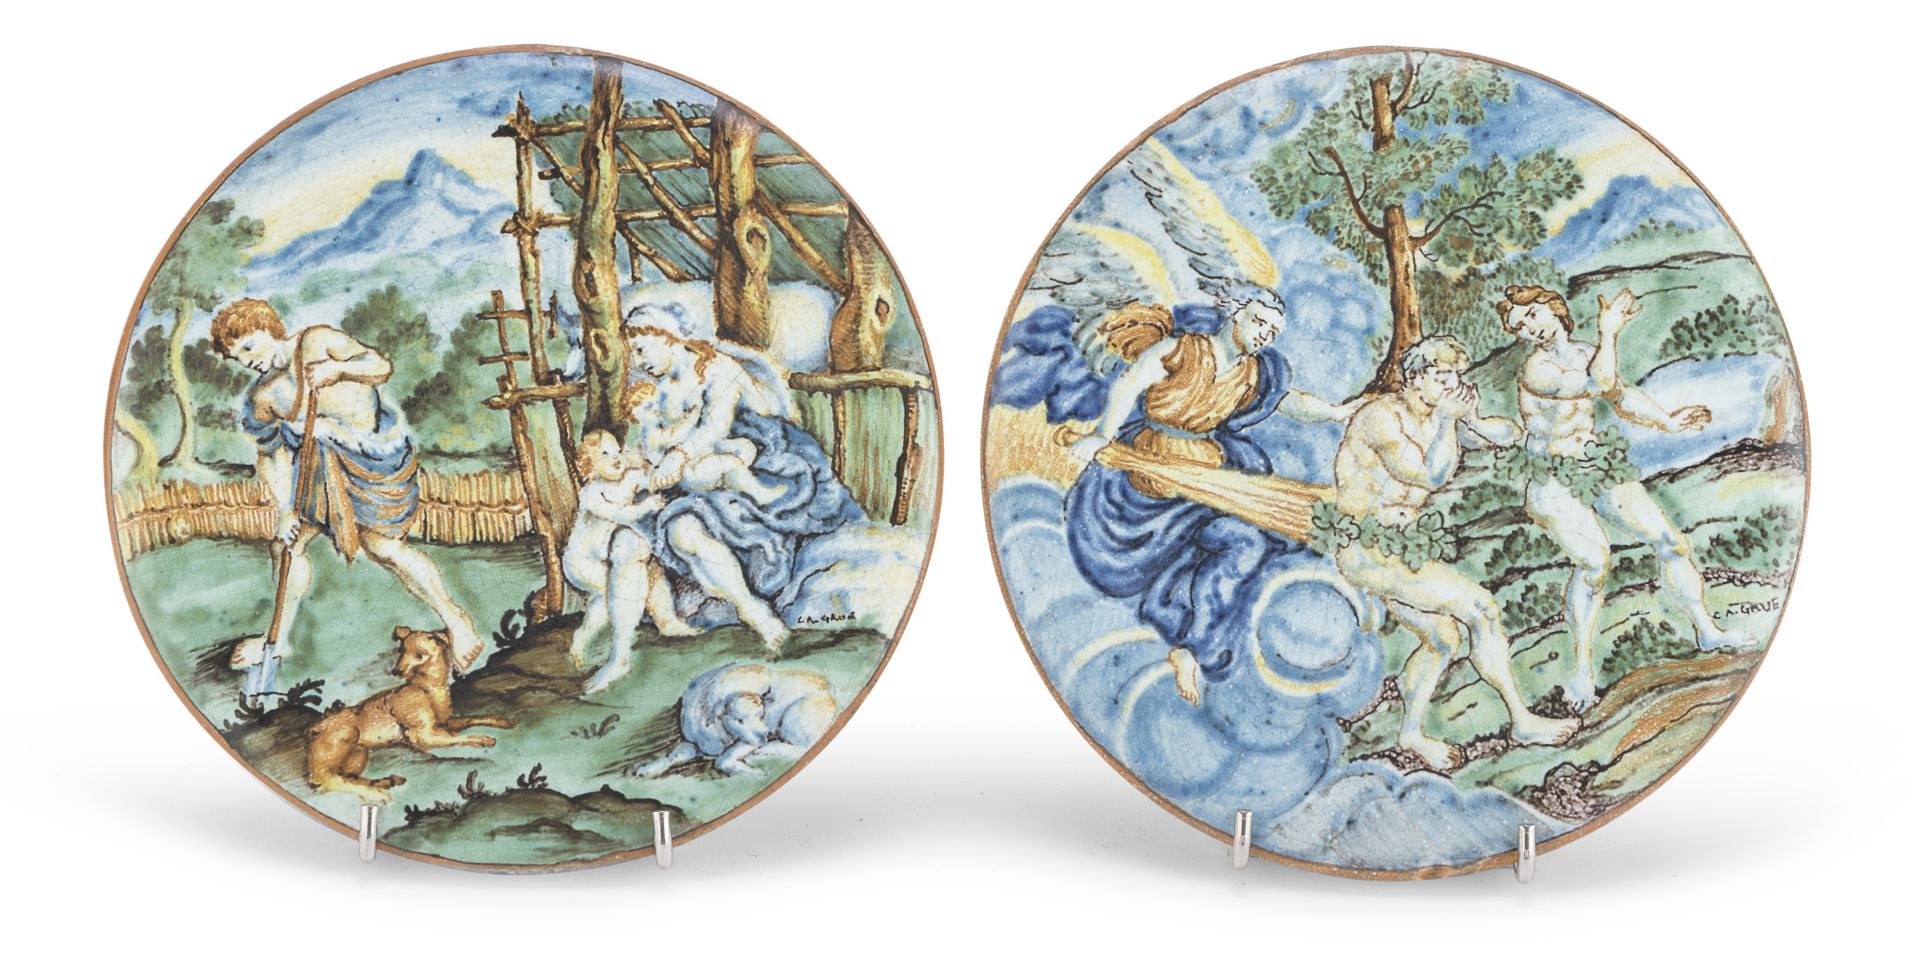 PAIR OF MAIOLICA PLATES ROMAN CASTLES END OF THE 19TH CENTURY